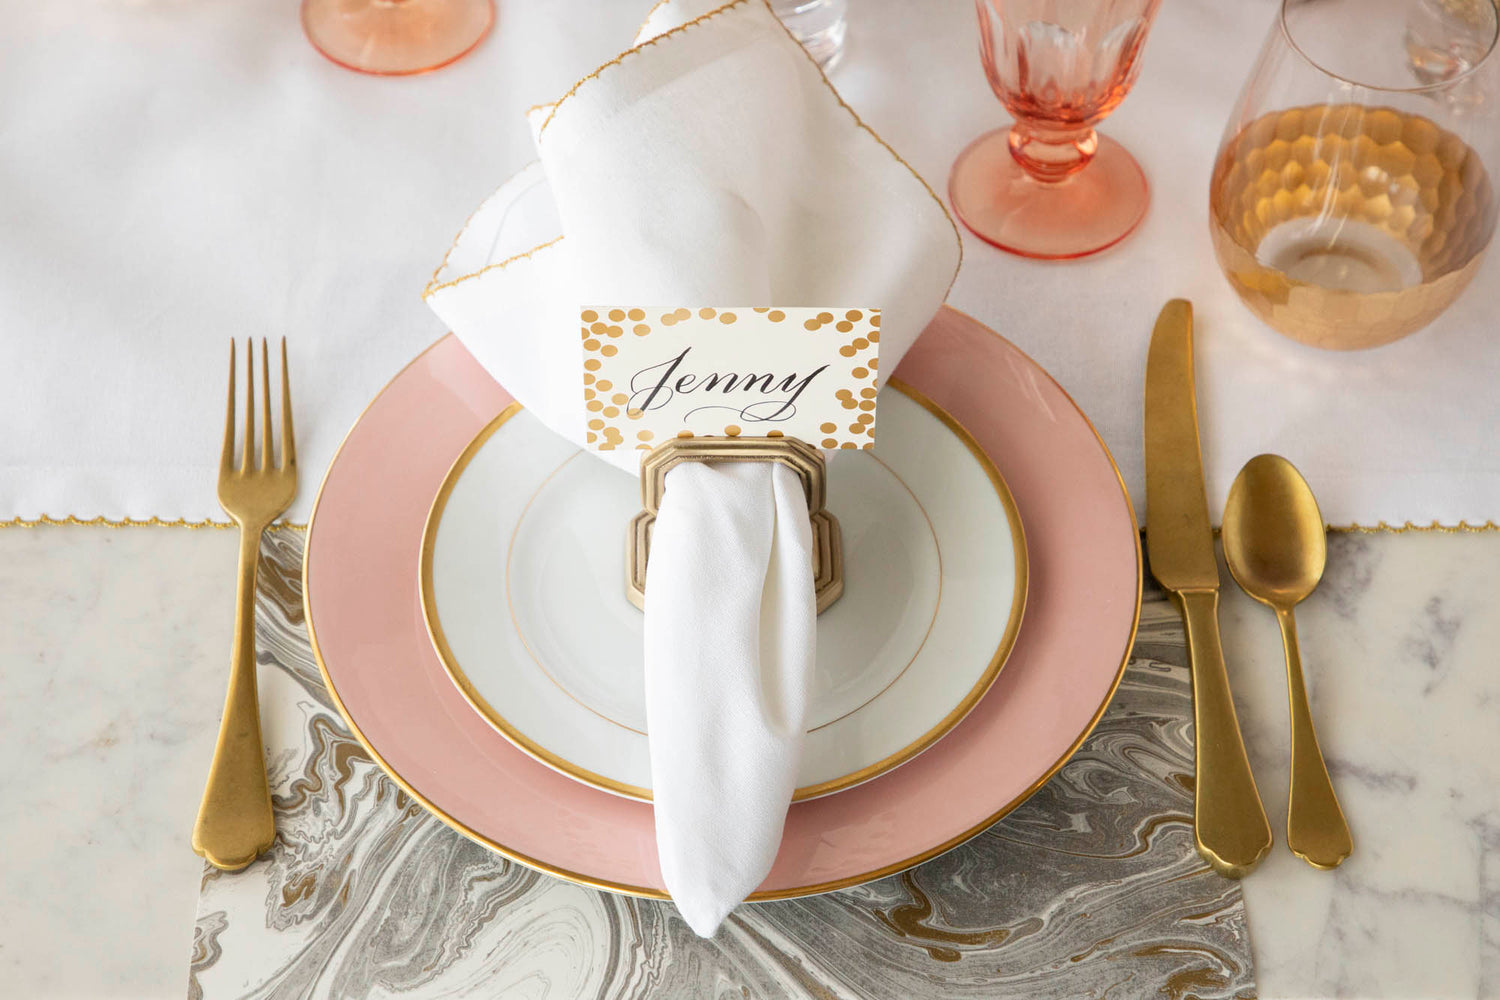 A Brass Napkin Ring with Place Card Holder on the plate of an elegant place setting, from above.